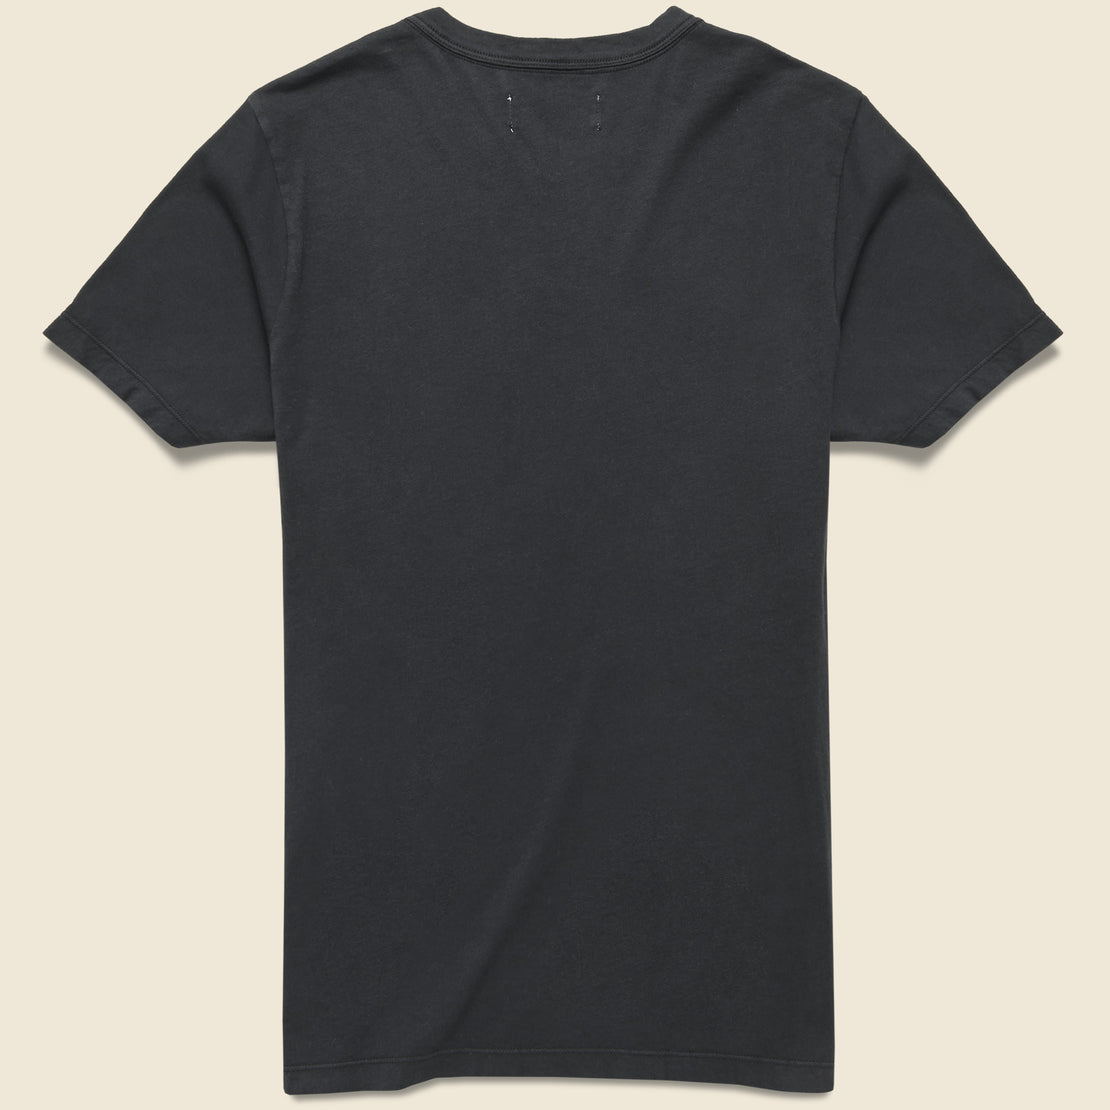 Bolt Tee - Black - Imogene + Willie - STAG Provisions - Tops - S/S Tee - Graphic